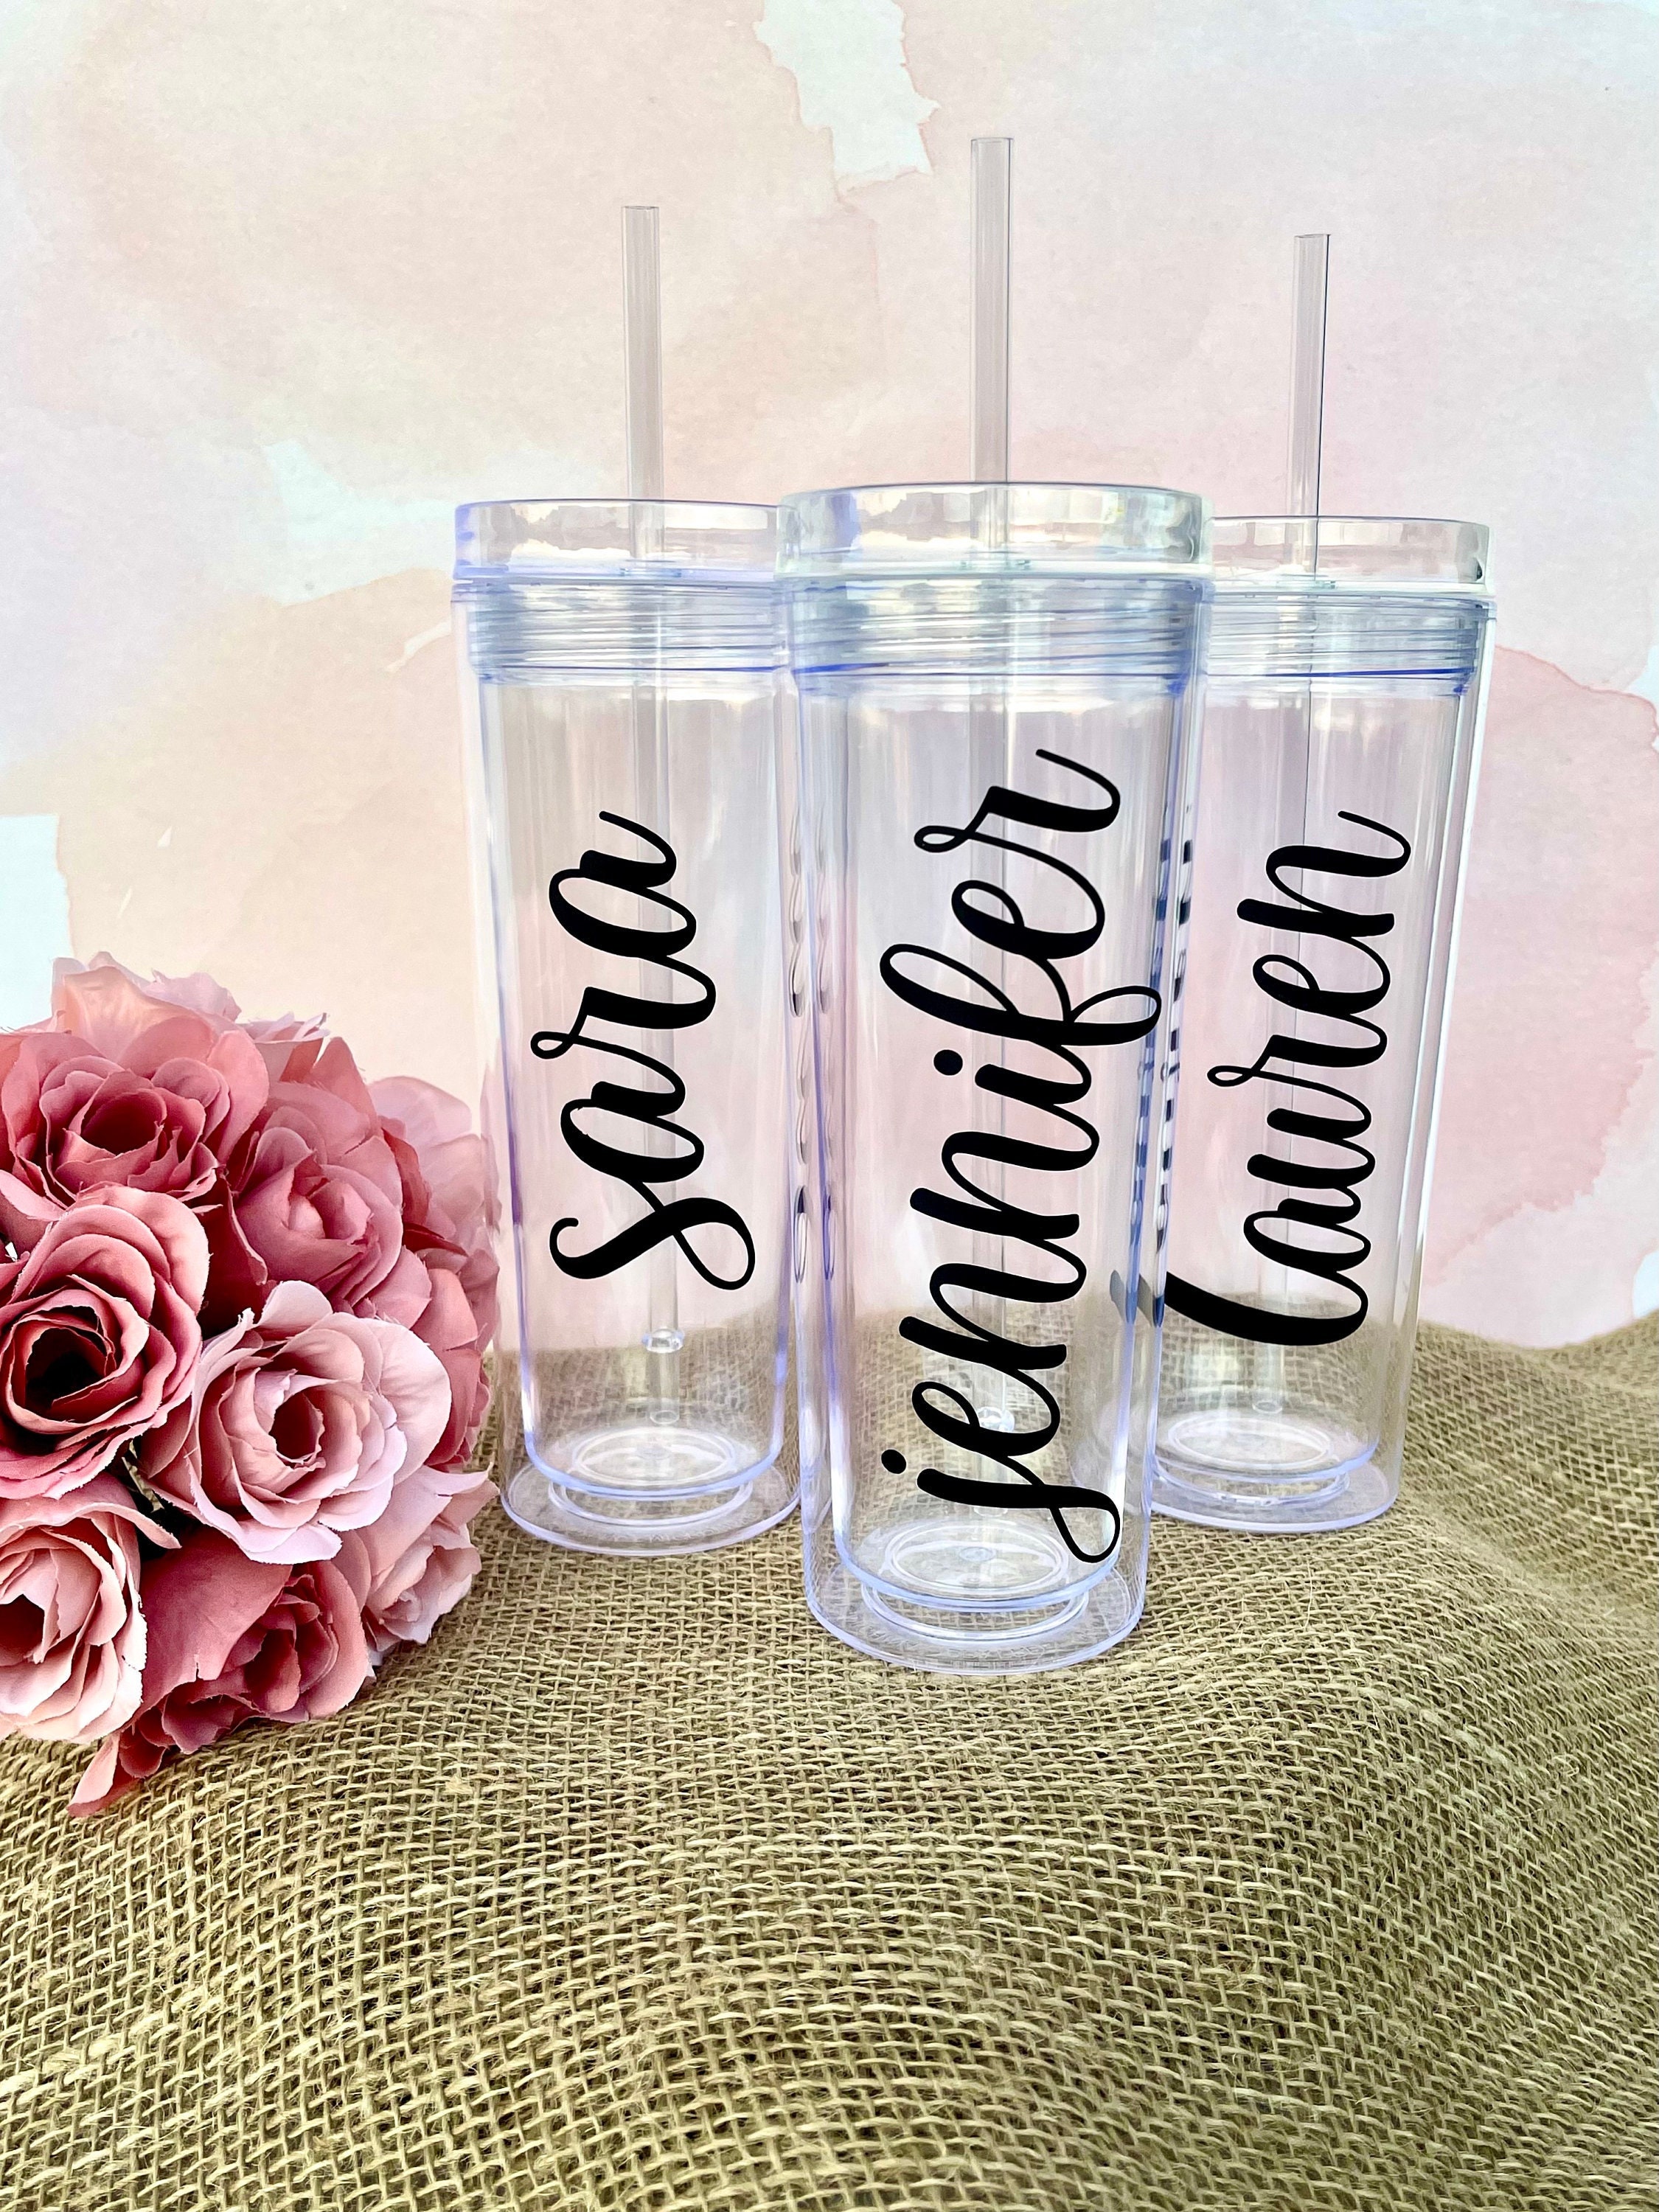 Acrylic Skinny Sublimation Tumblers With Lids And Straws Skinny Tumbler  Clear Plastic Skinny Sublimation Tumblers 16oz Travel Cups Water Cup  Reusable Cup With Straw From Hc_network, $1.91